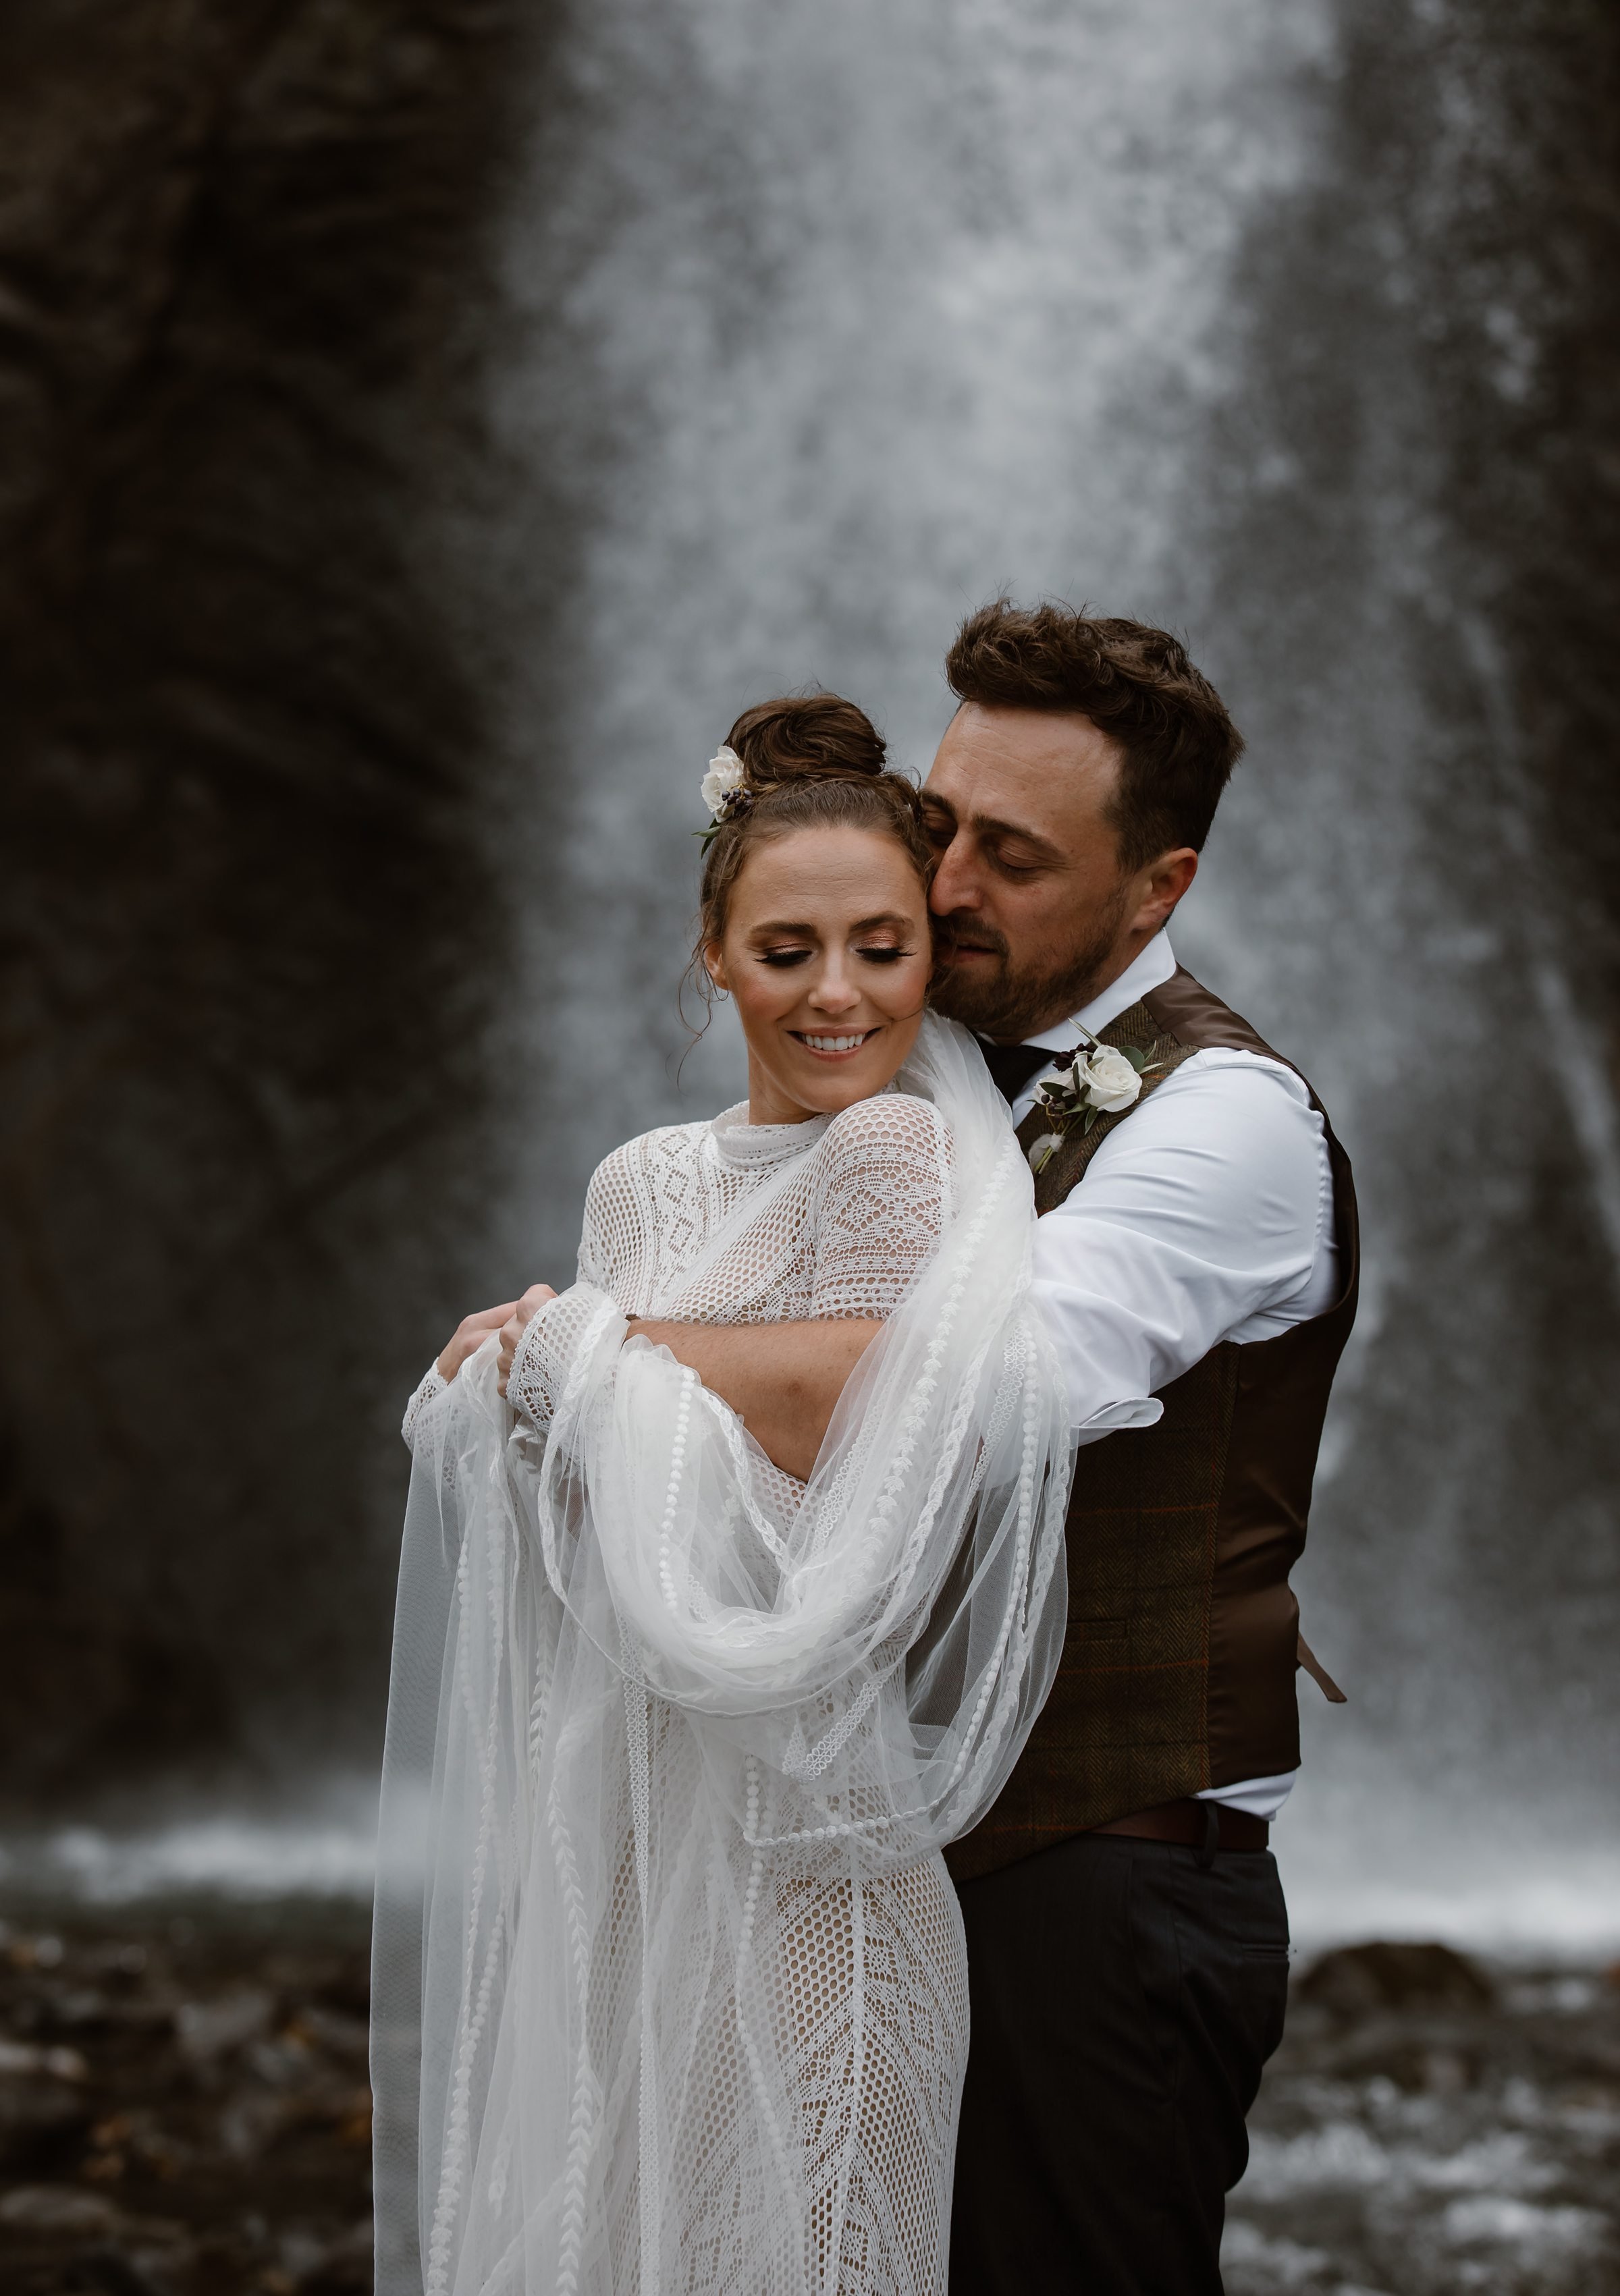  bride and groom portraits with waterfall 